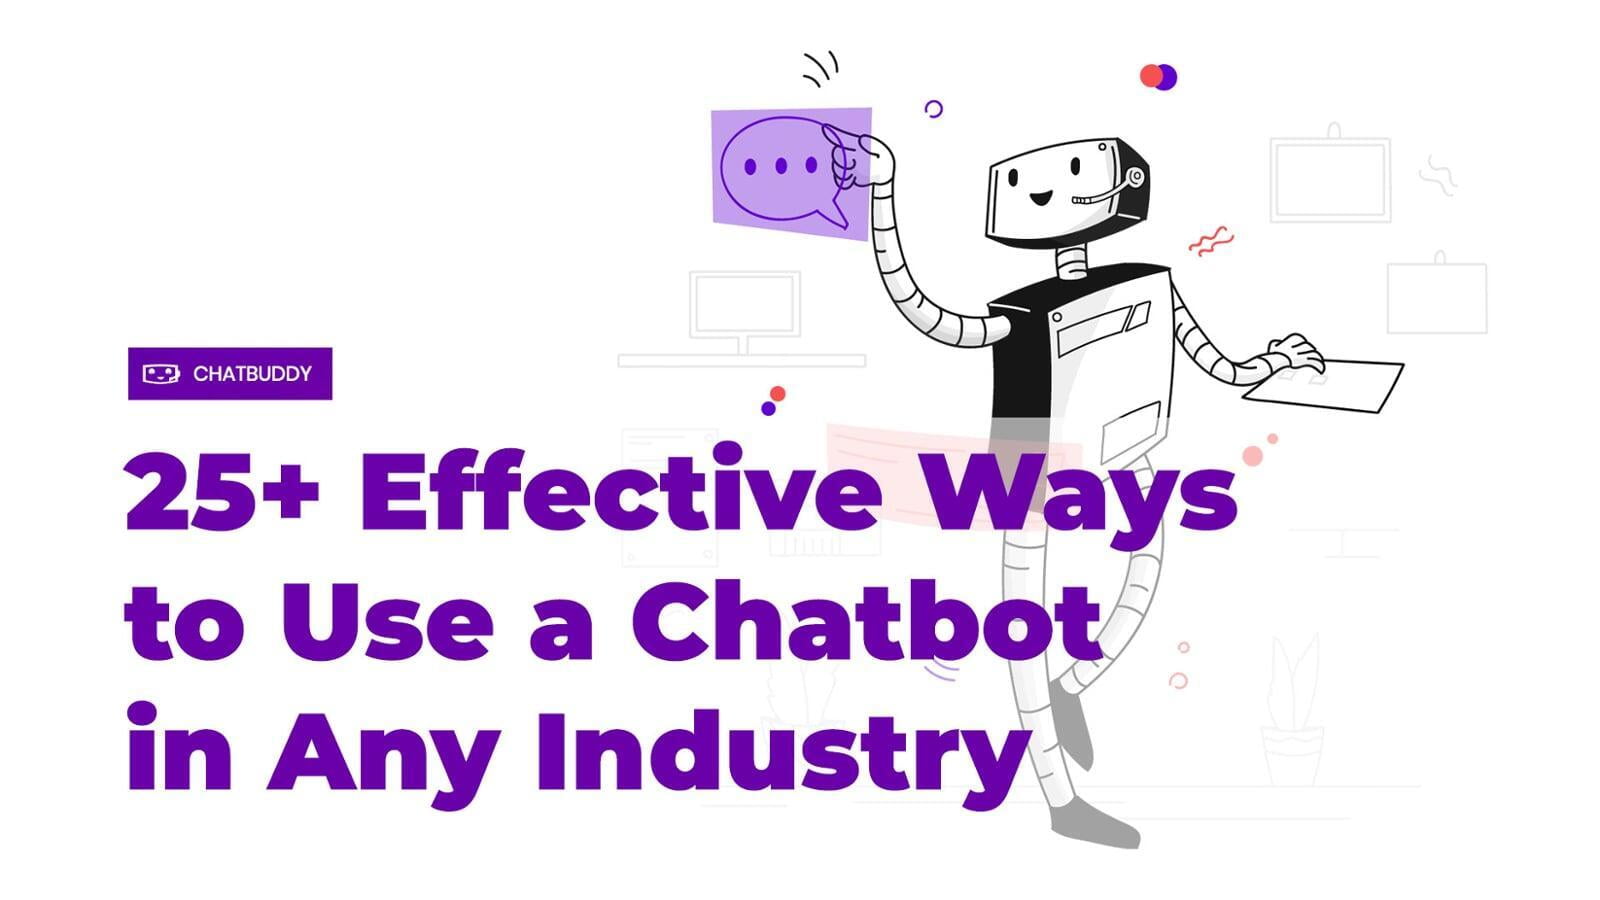 25+ Effective Ways to Use a Chatbot in Any Industry